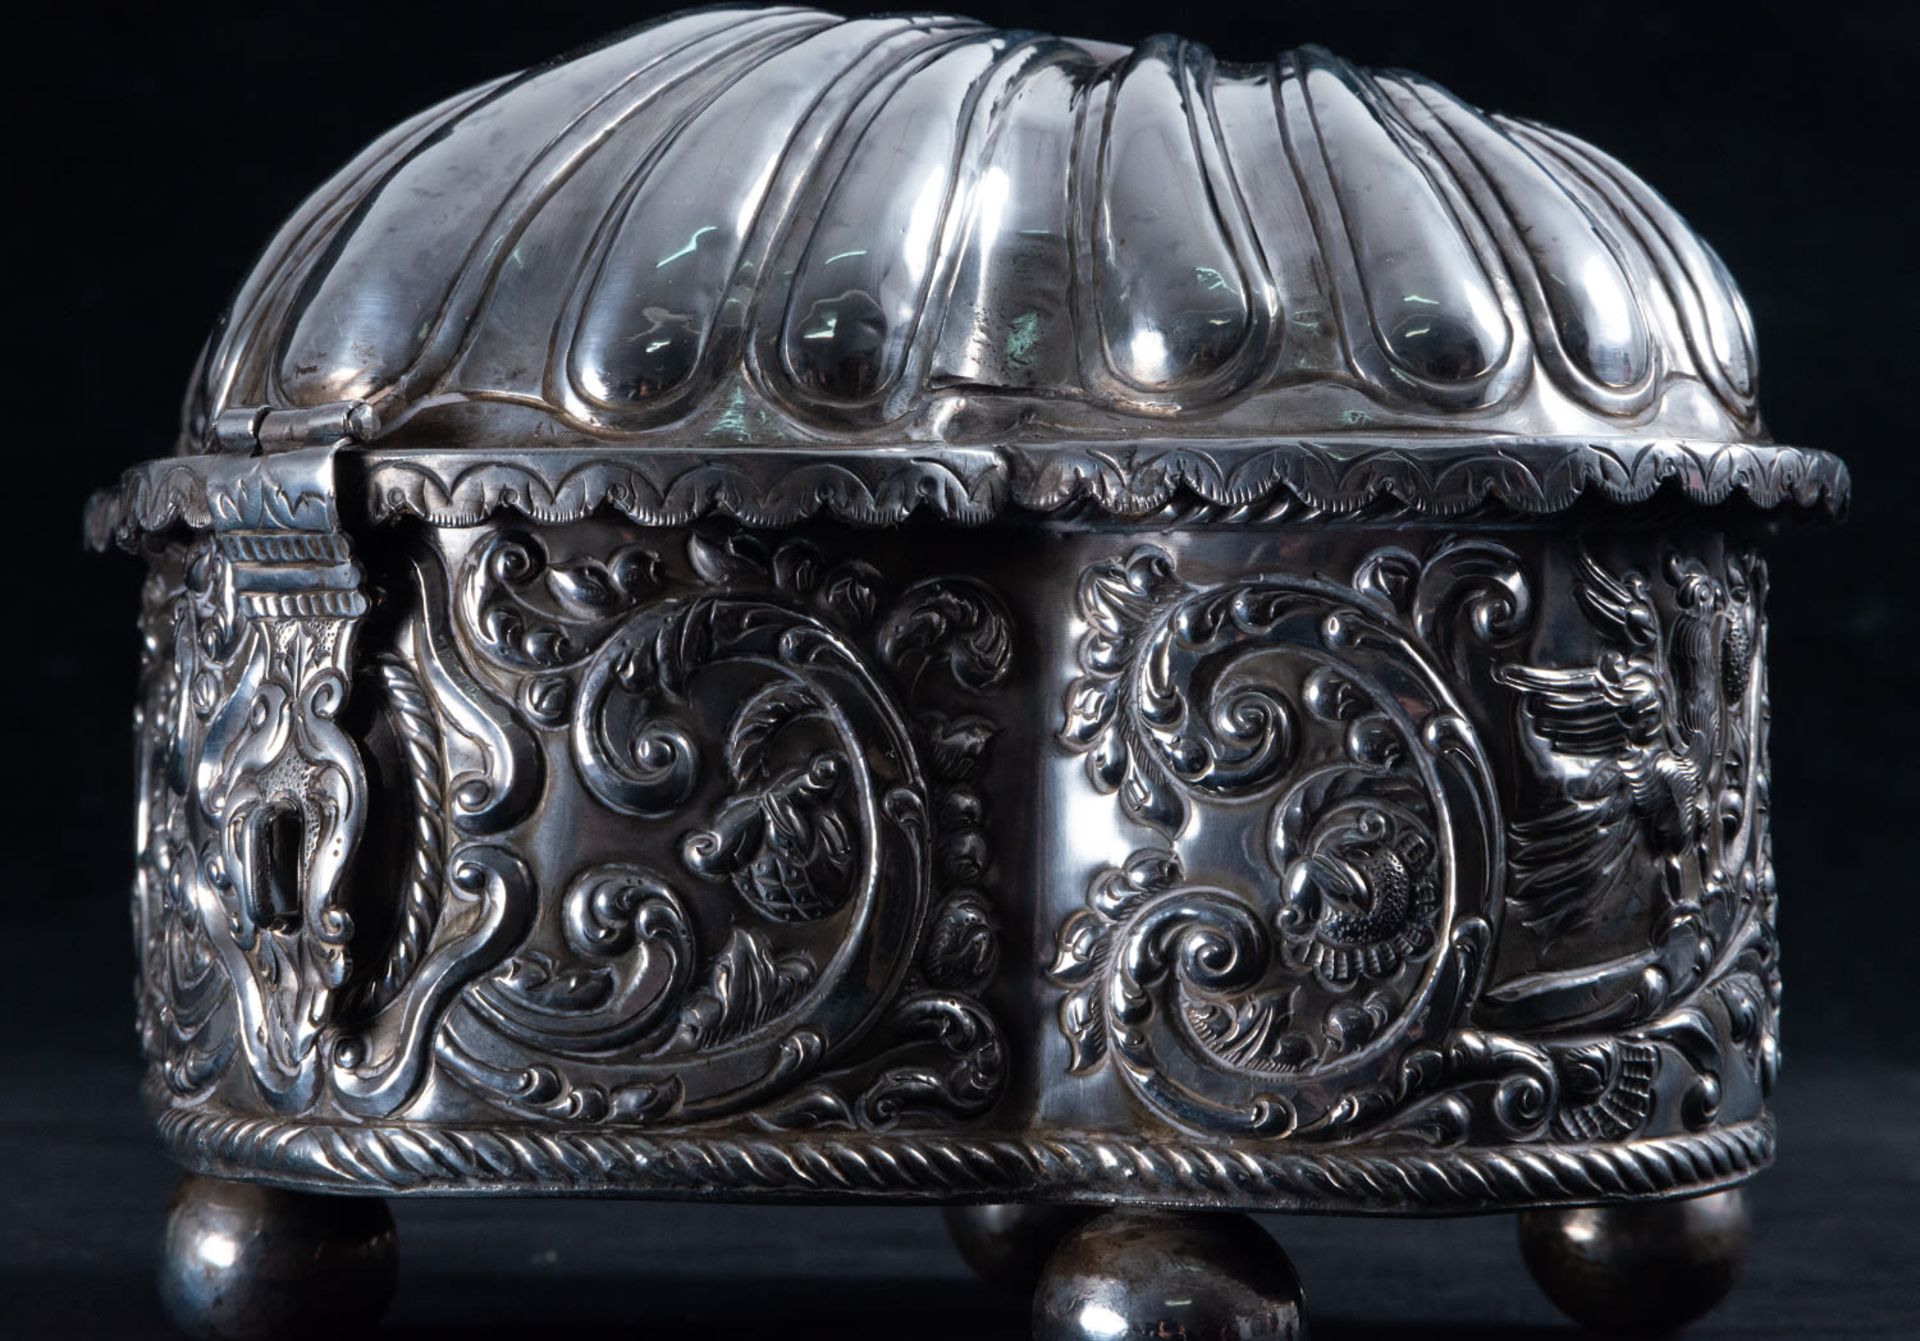 Exceptional Coquera in silver, colonial work, Cuzco, Peru, 18th century - Image 4 of 8